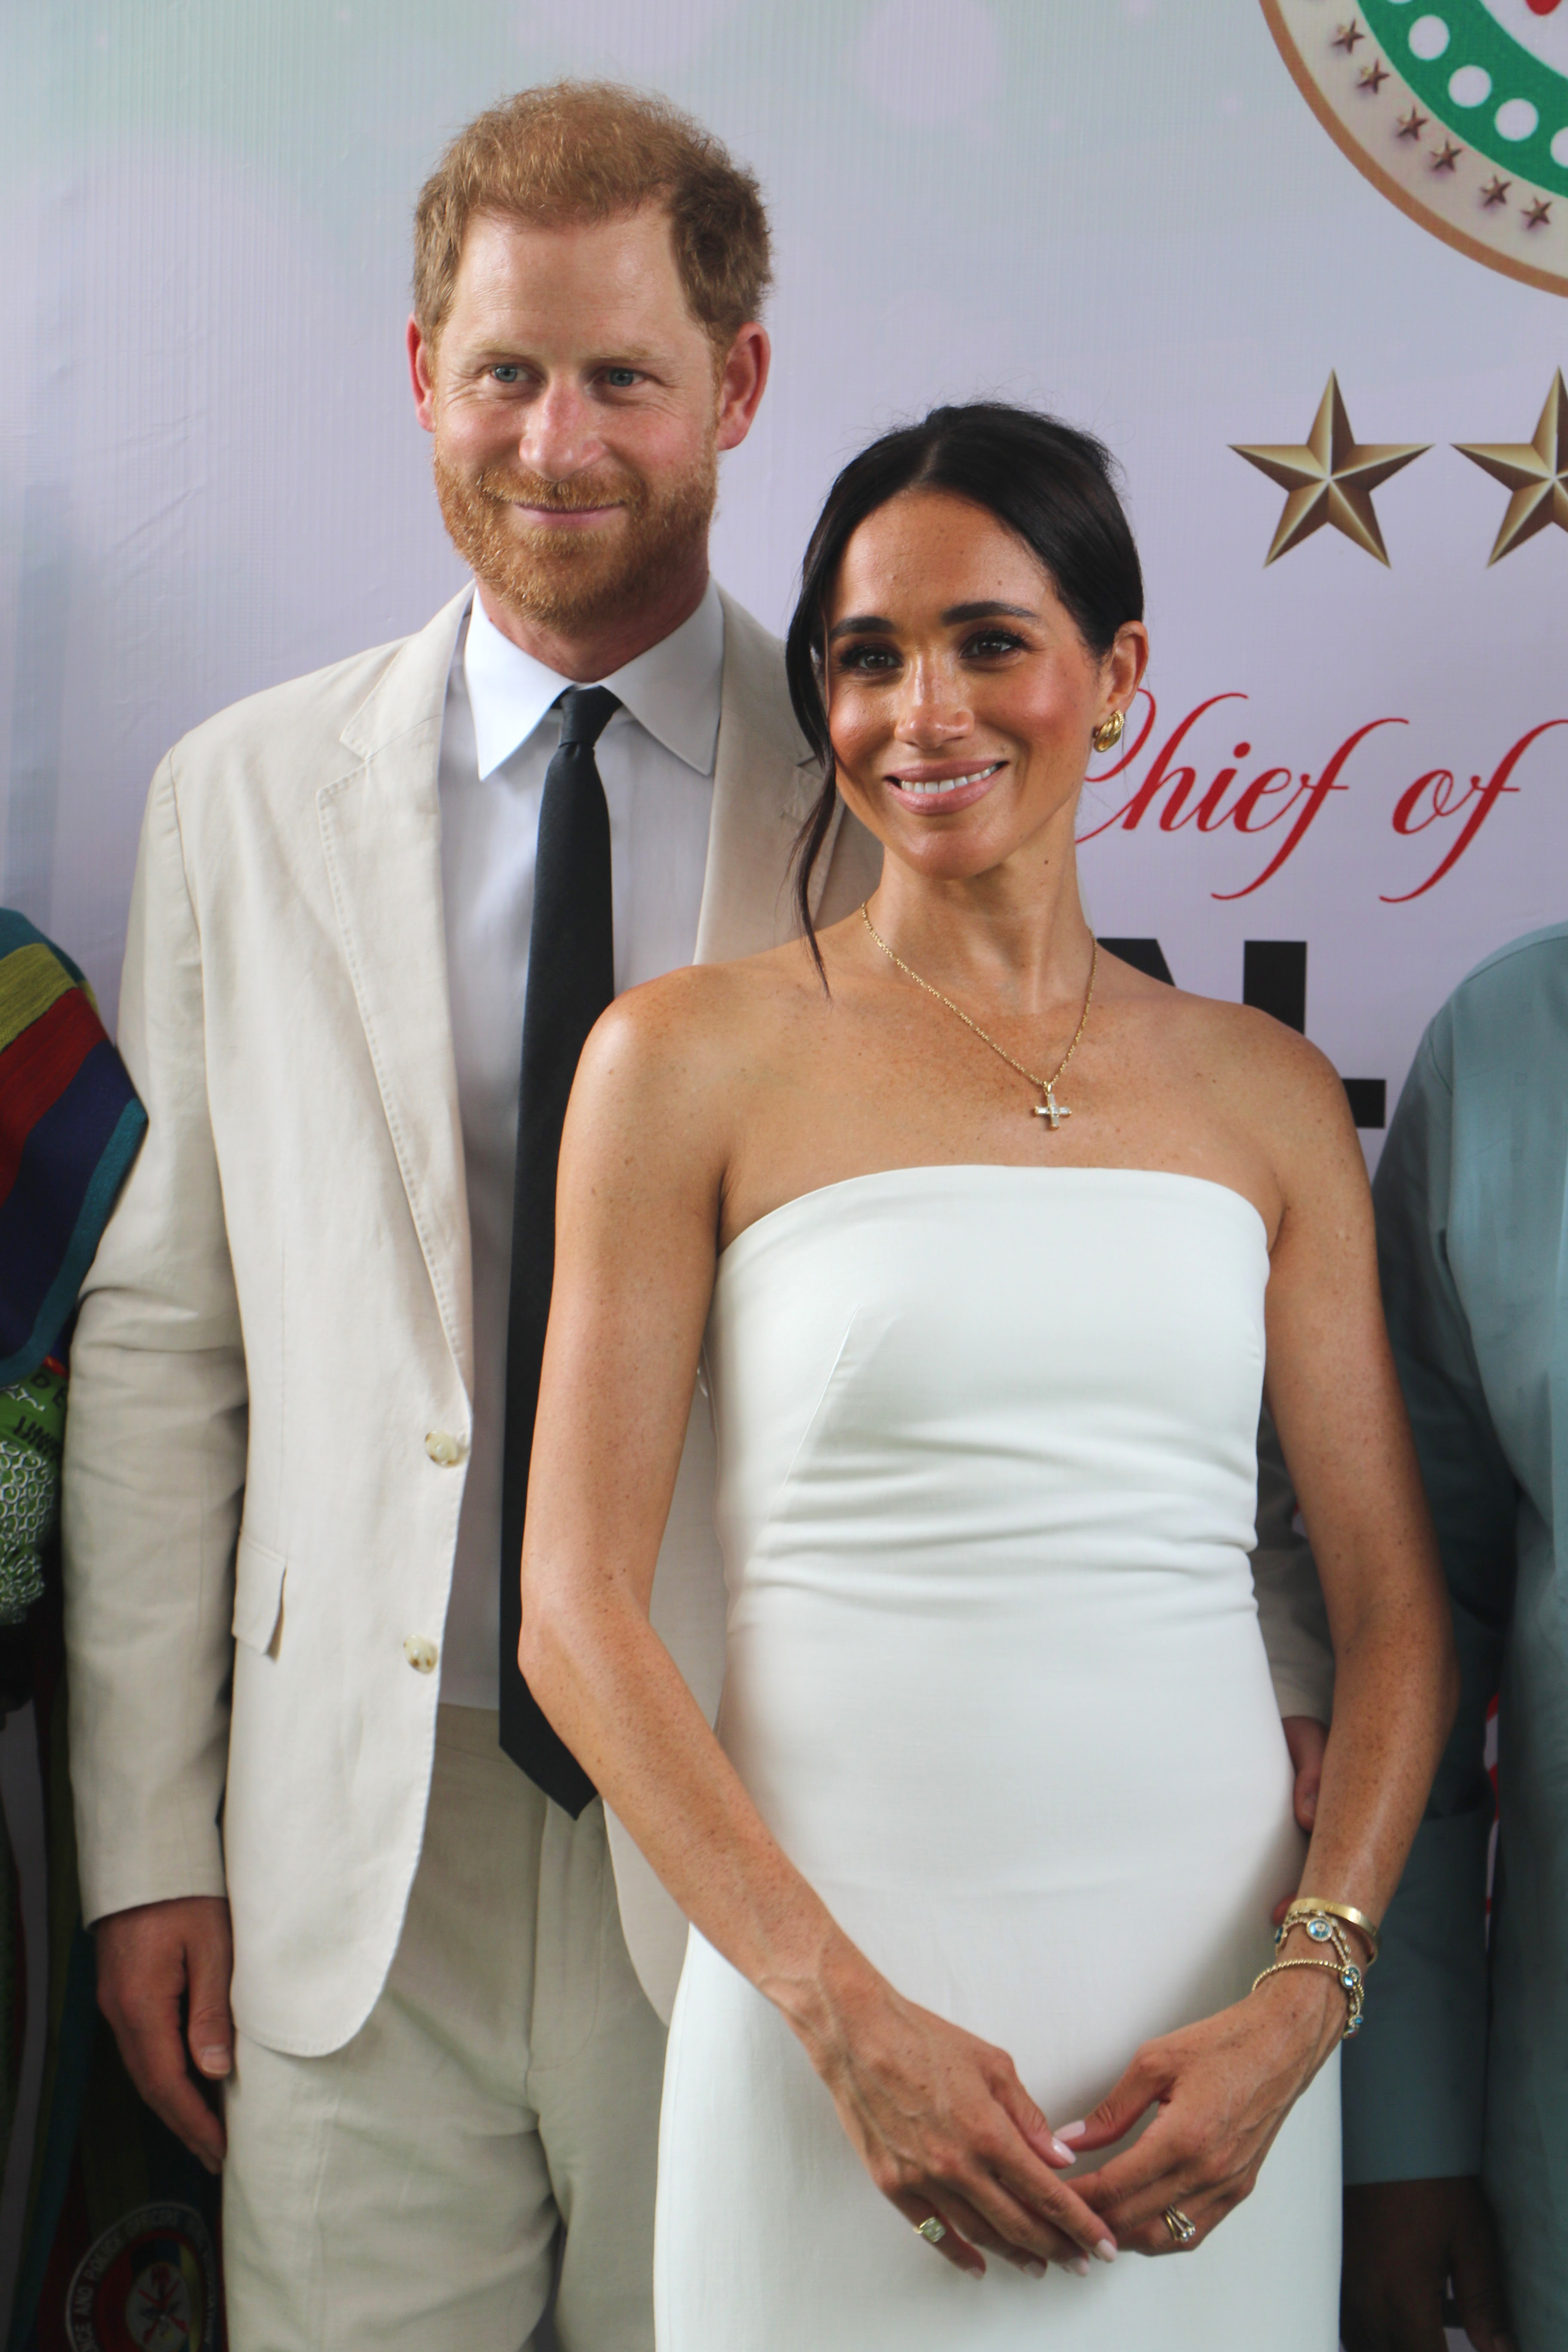 The Duke and Duchess of Sussex are on a three-day tour of Nigeria